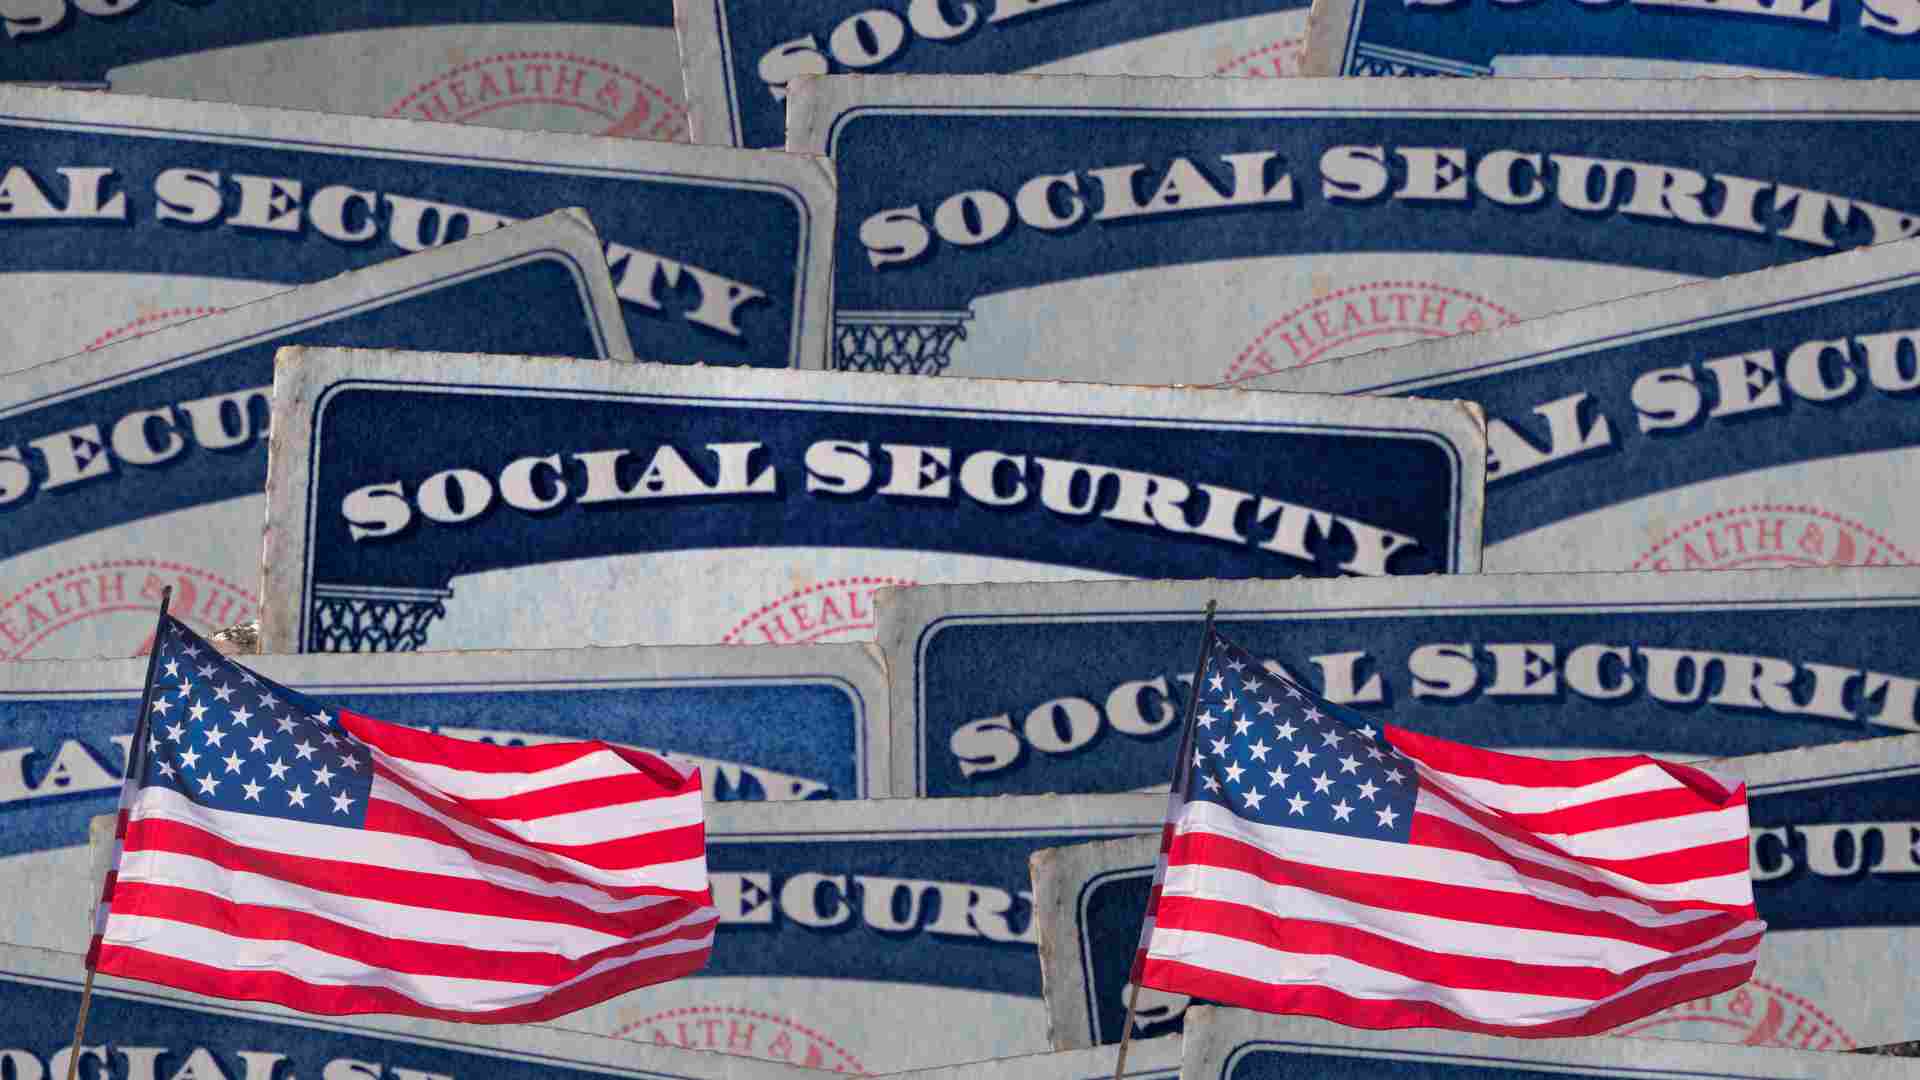 The Social Security Administration will pay you more or less money depending on your work and earnings history